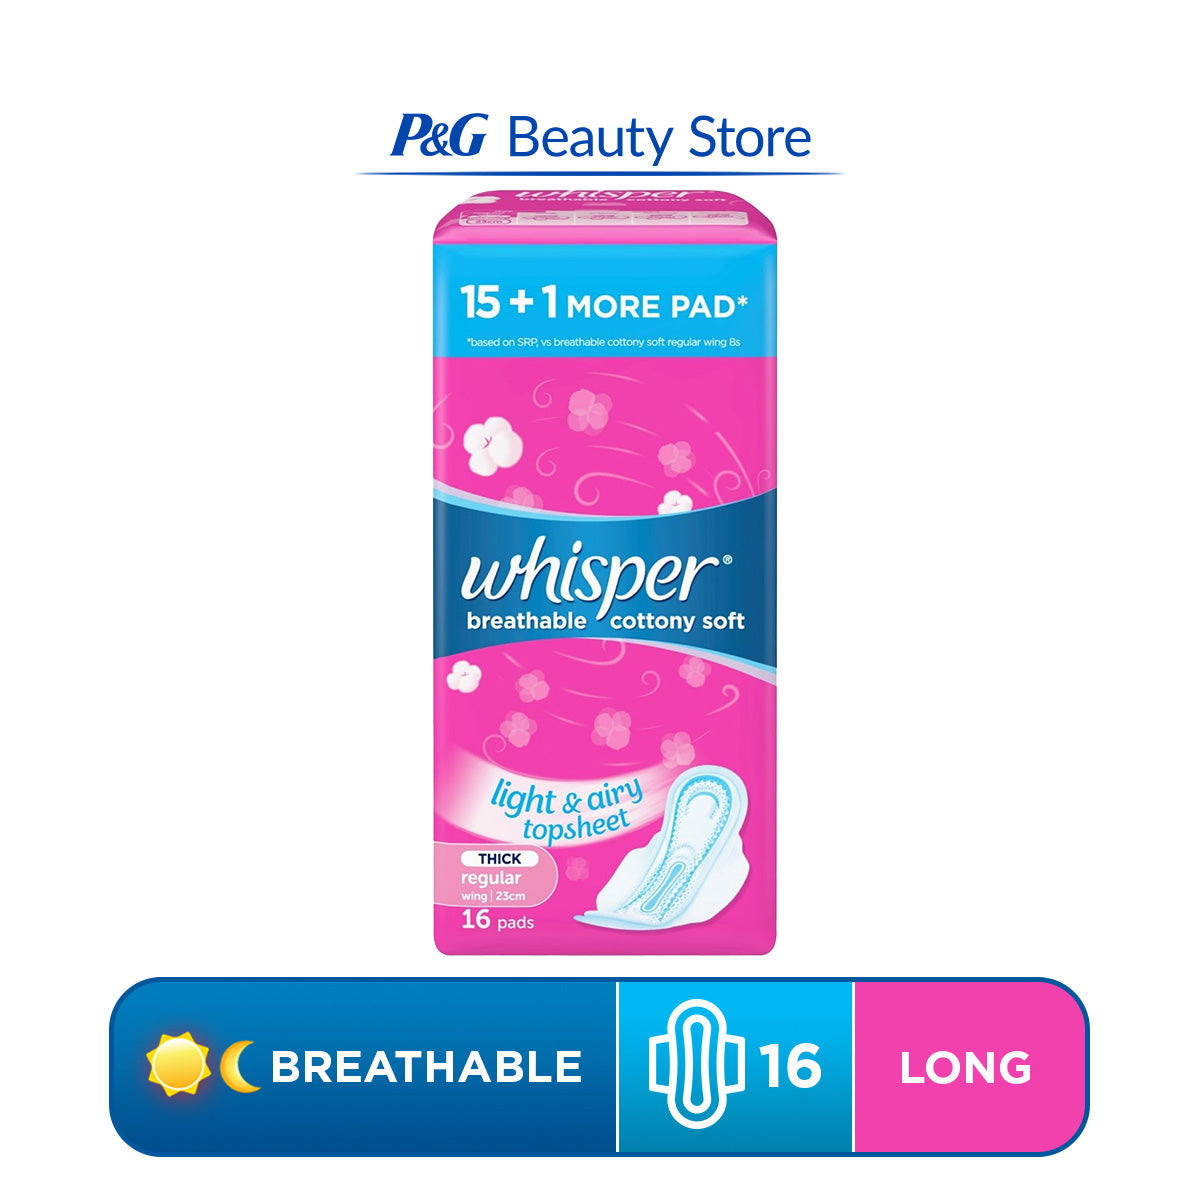 Whisper Cottony Soft Sanitary Napkin with Wings (16 pads) [All Day] [Heavy Flow] [Long]